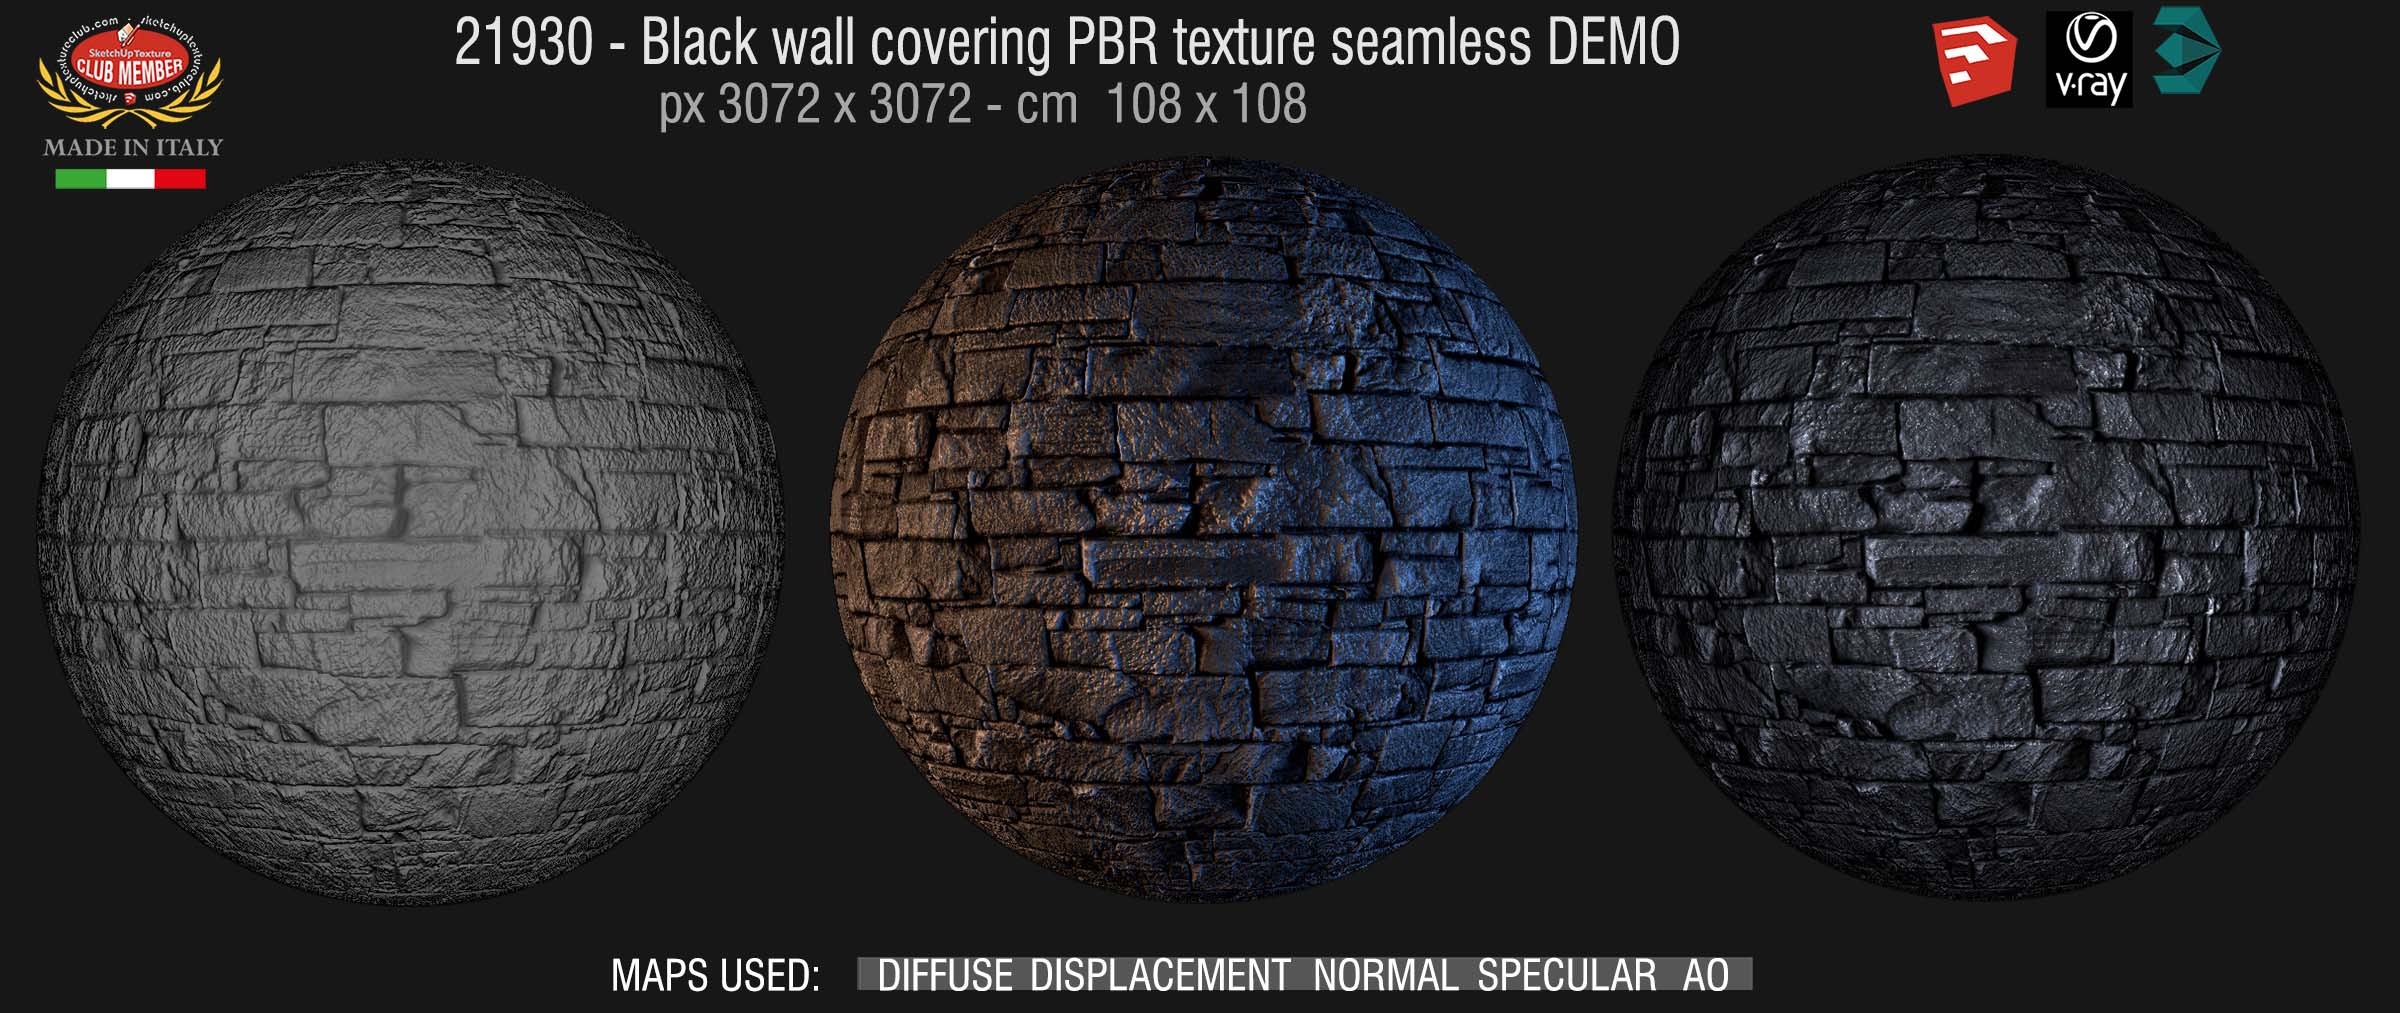 21930 Black wall covering PBR texture seamless DEMO